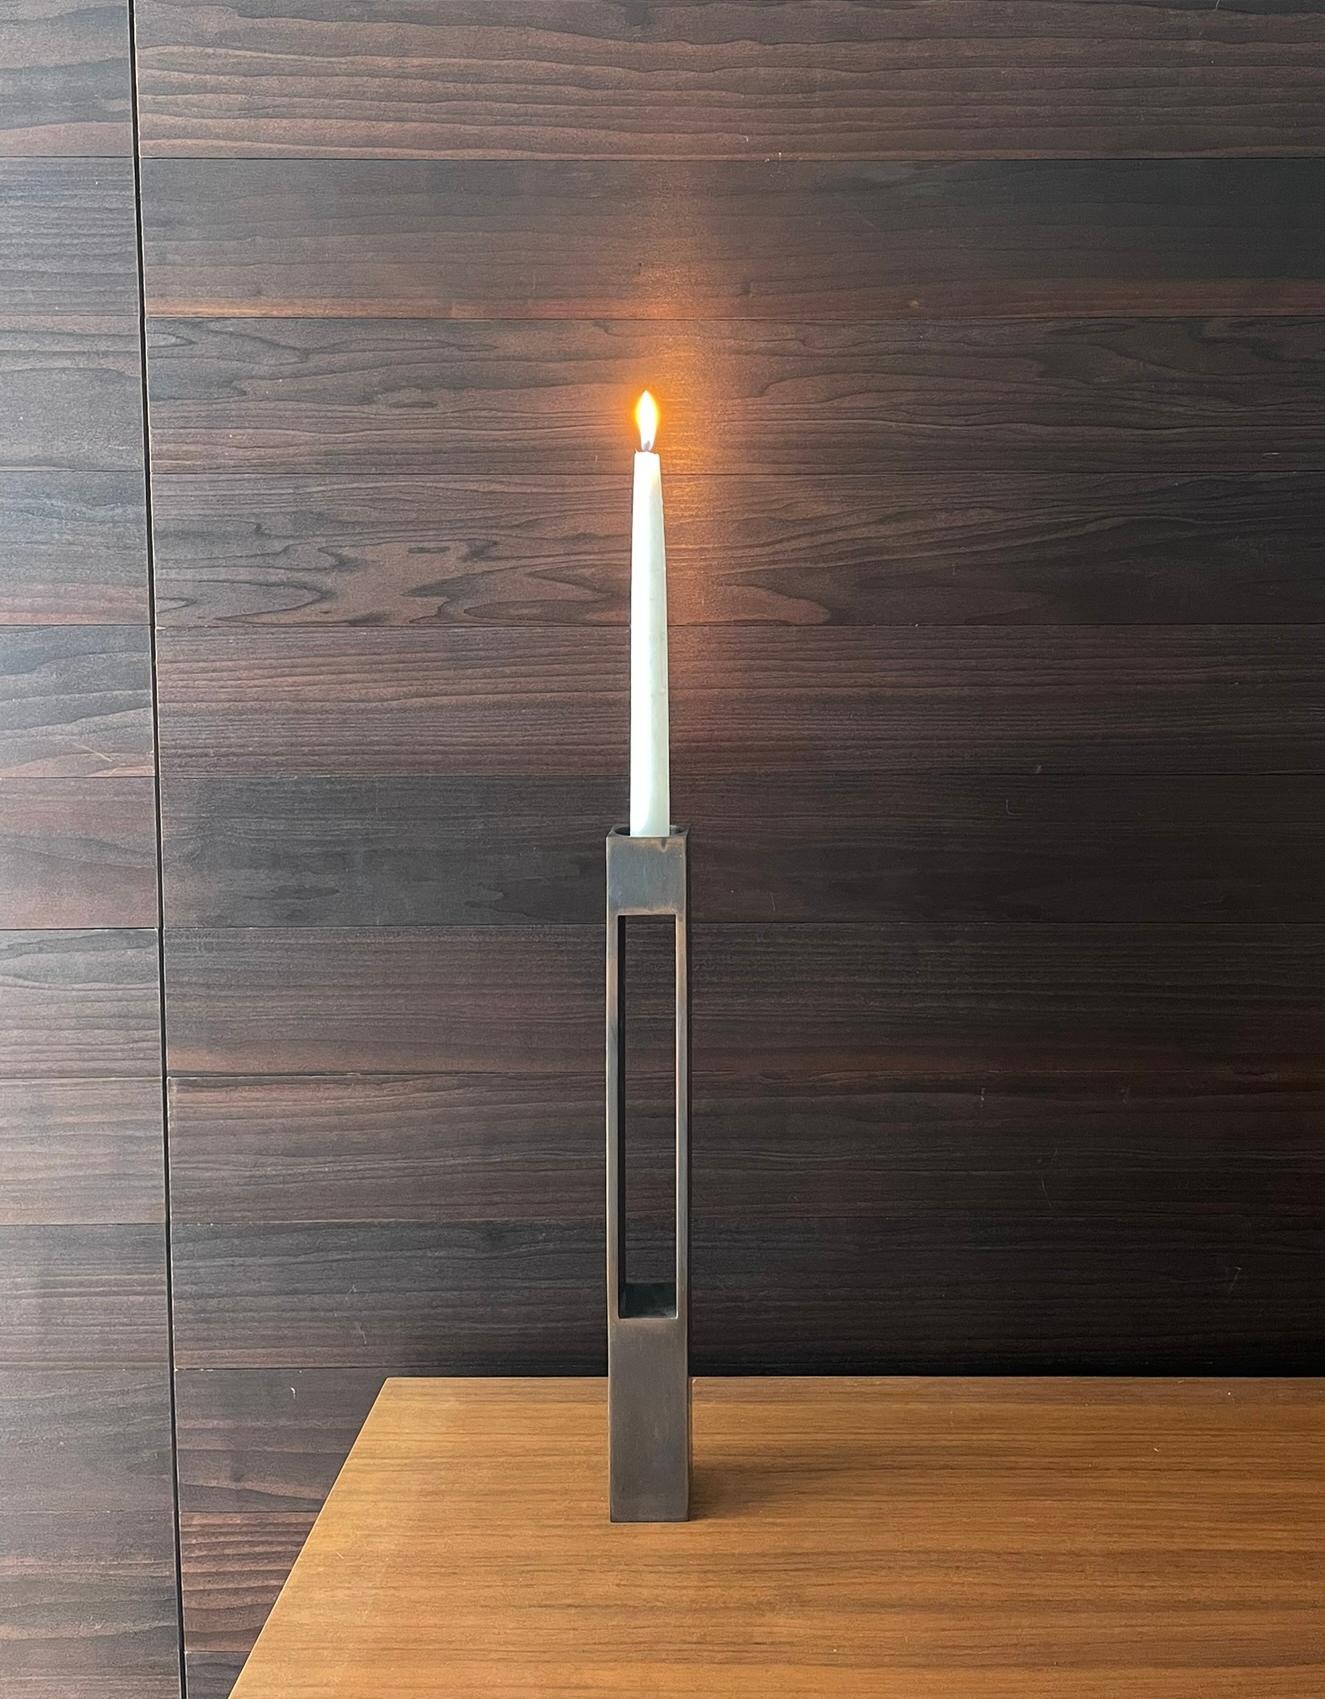 These stately bronze candle holders are pedestals designed to accommodate either tea lights or taper candles. Depending upon your viewing angle, the tall metal candle holders can seem either light and open, or solid and rooted. Both modern and